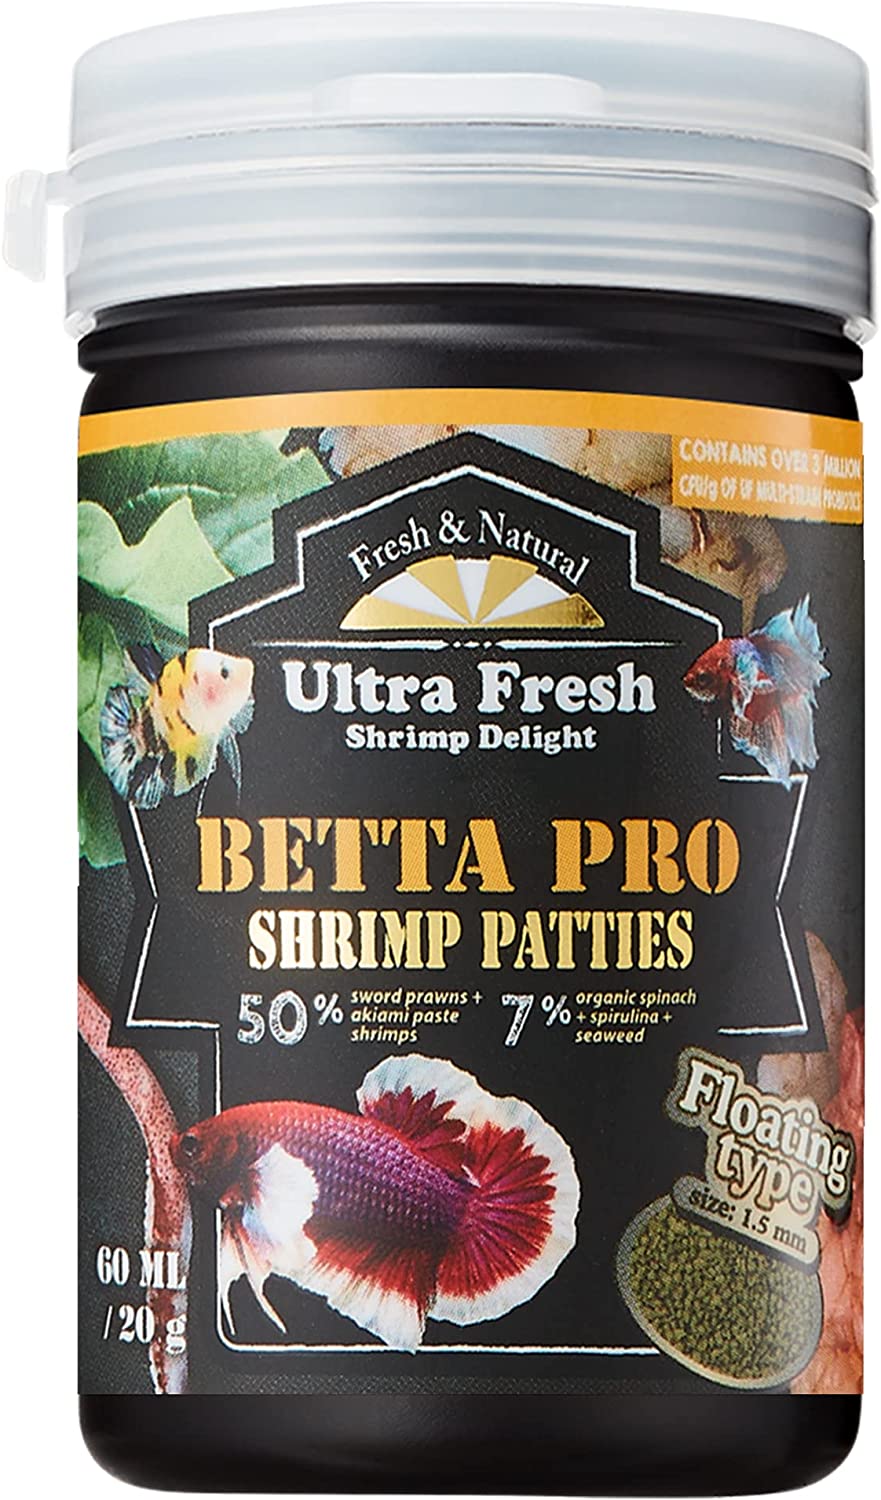 The Best Betta Fish Food: What You Need to Know